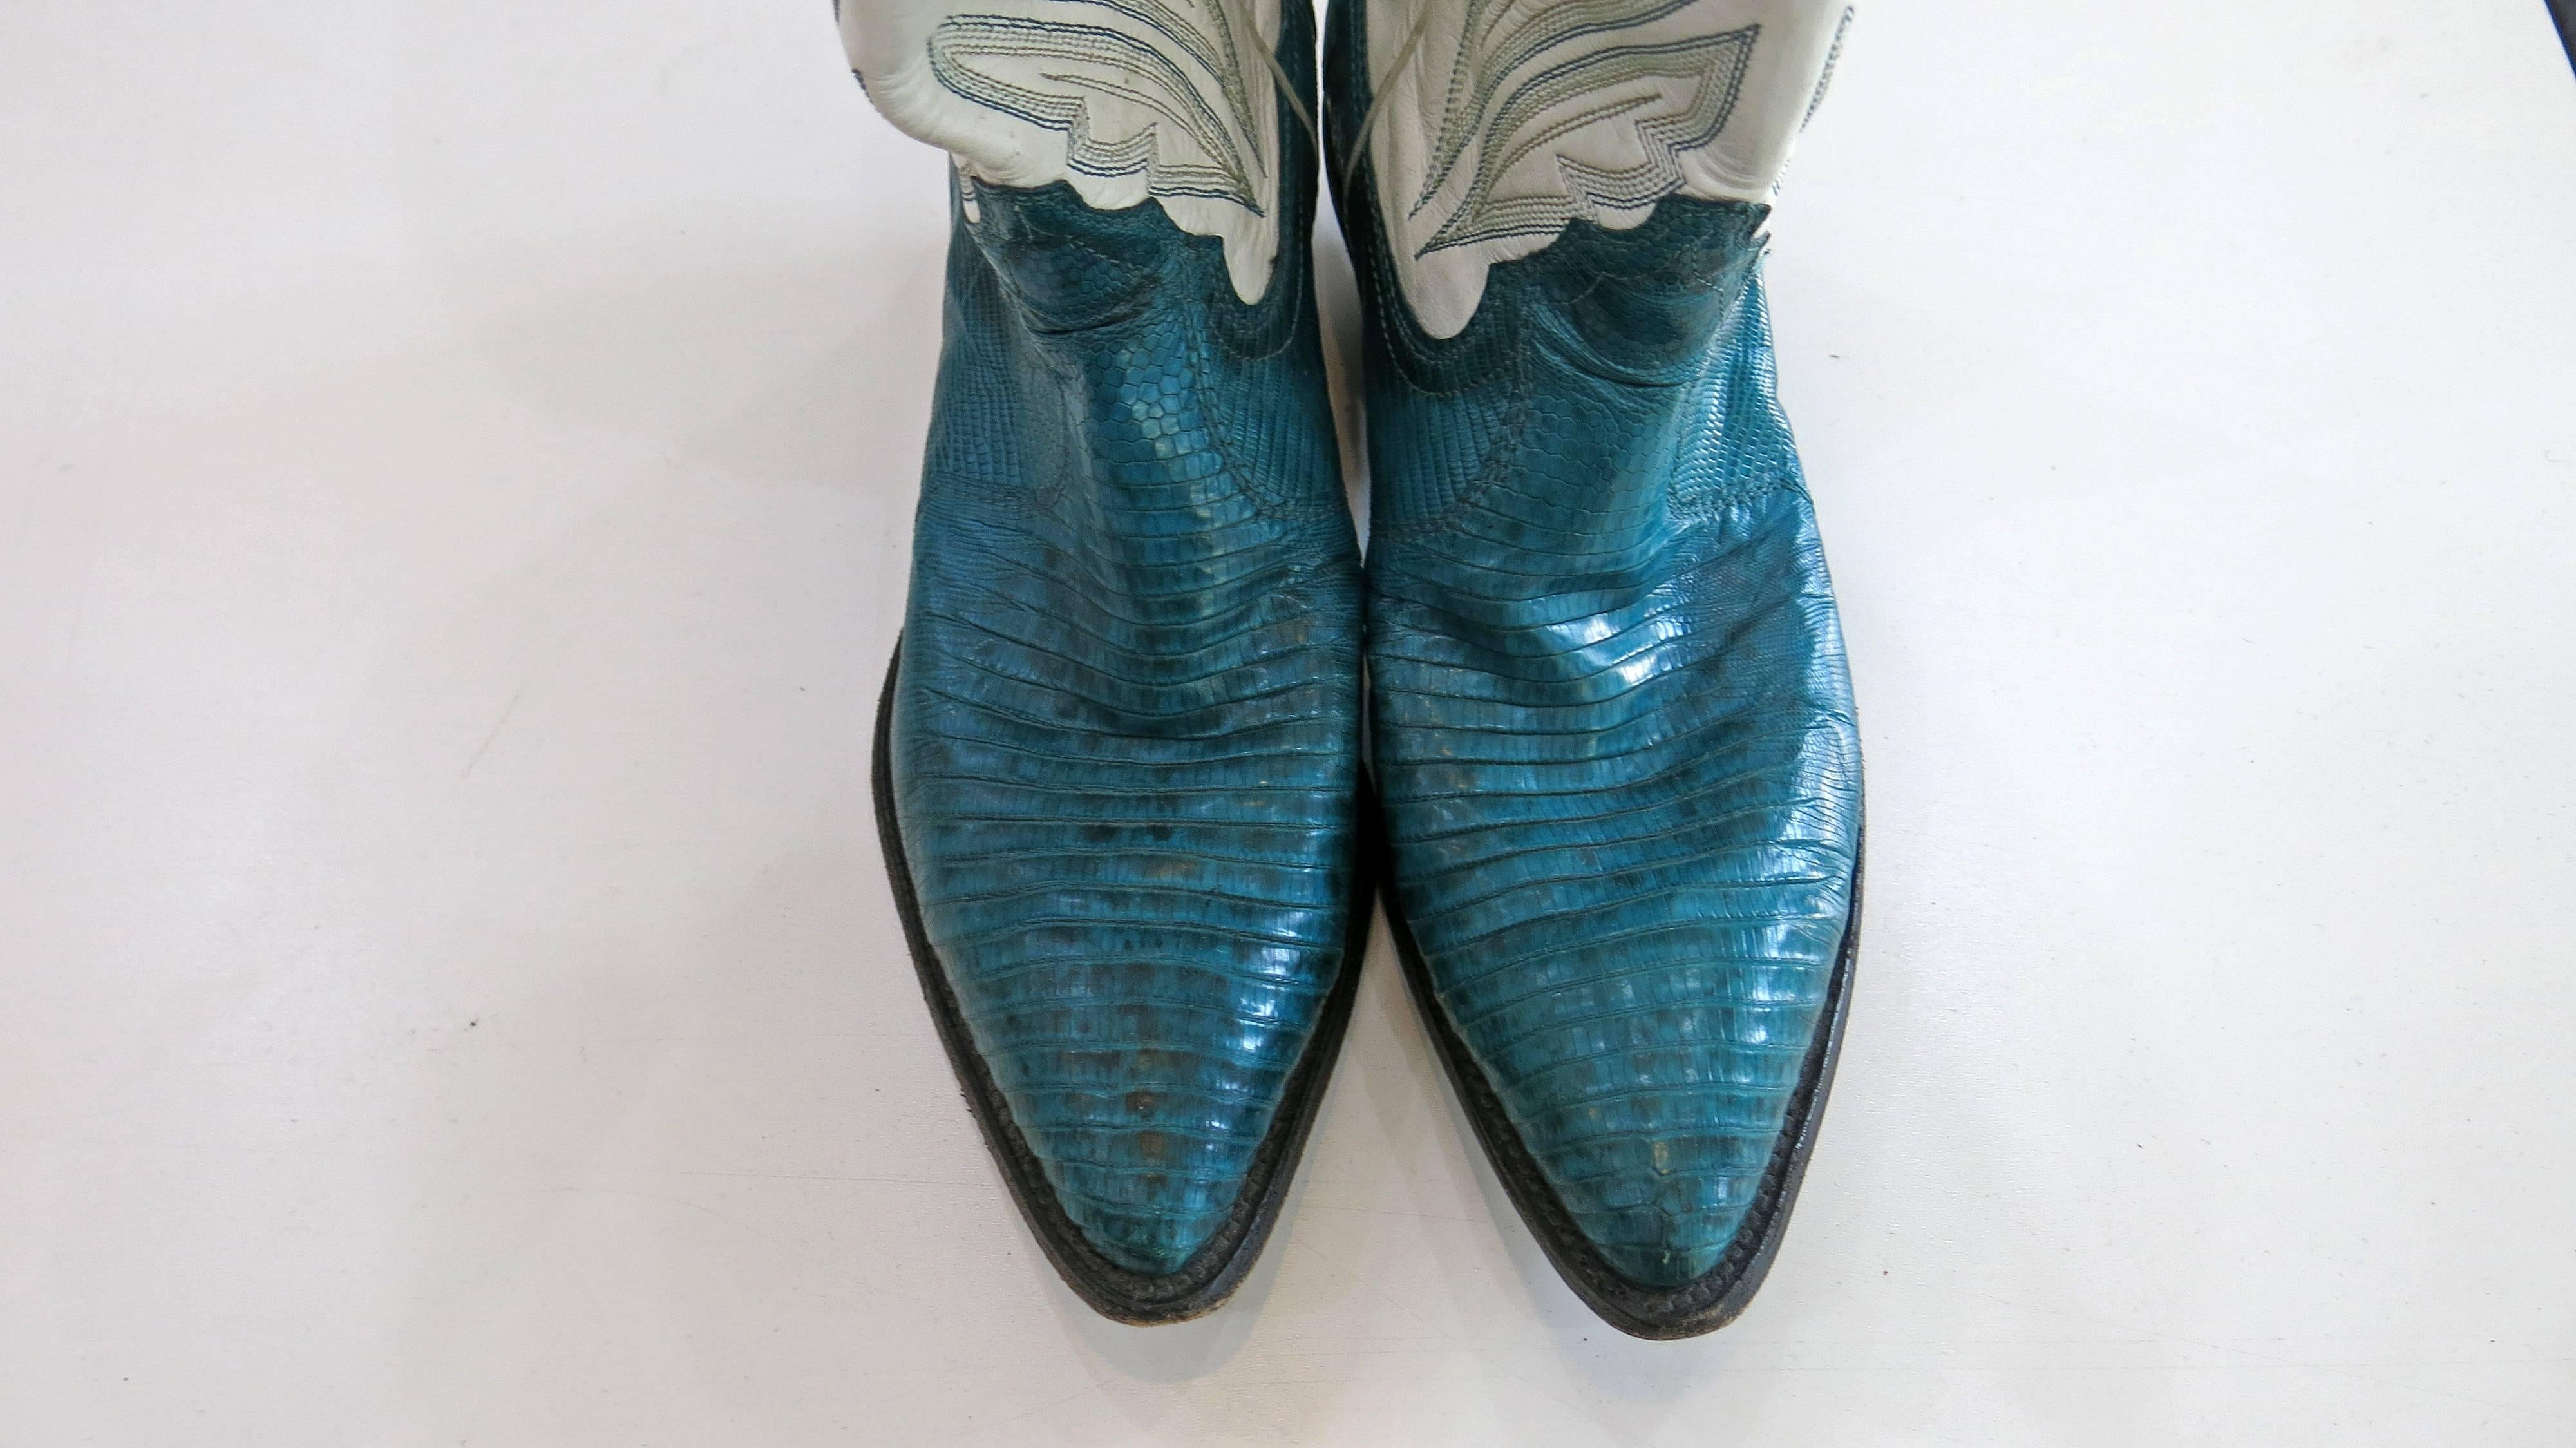 White and turquoise leather and snakeskin cowboy boots. Stitching on the upper part. White piping on either side of both boots. Nicely broken in and the soles are in great condition. Very well made boots. 4 inch opening for calves. 

Justin was one